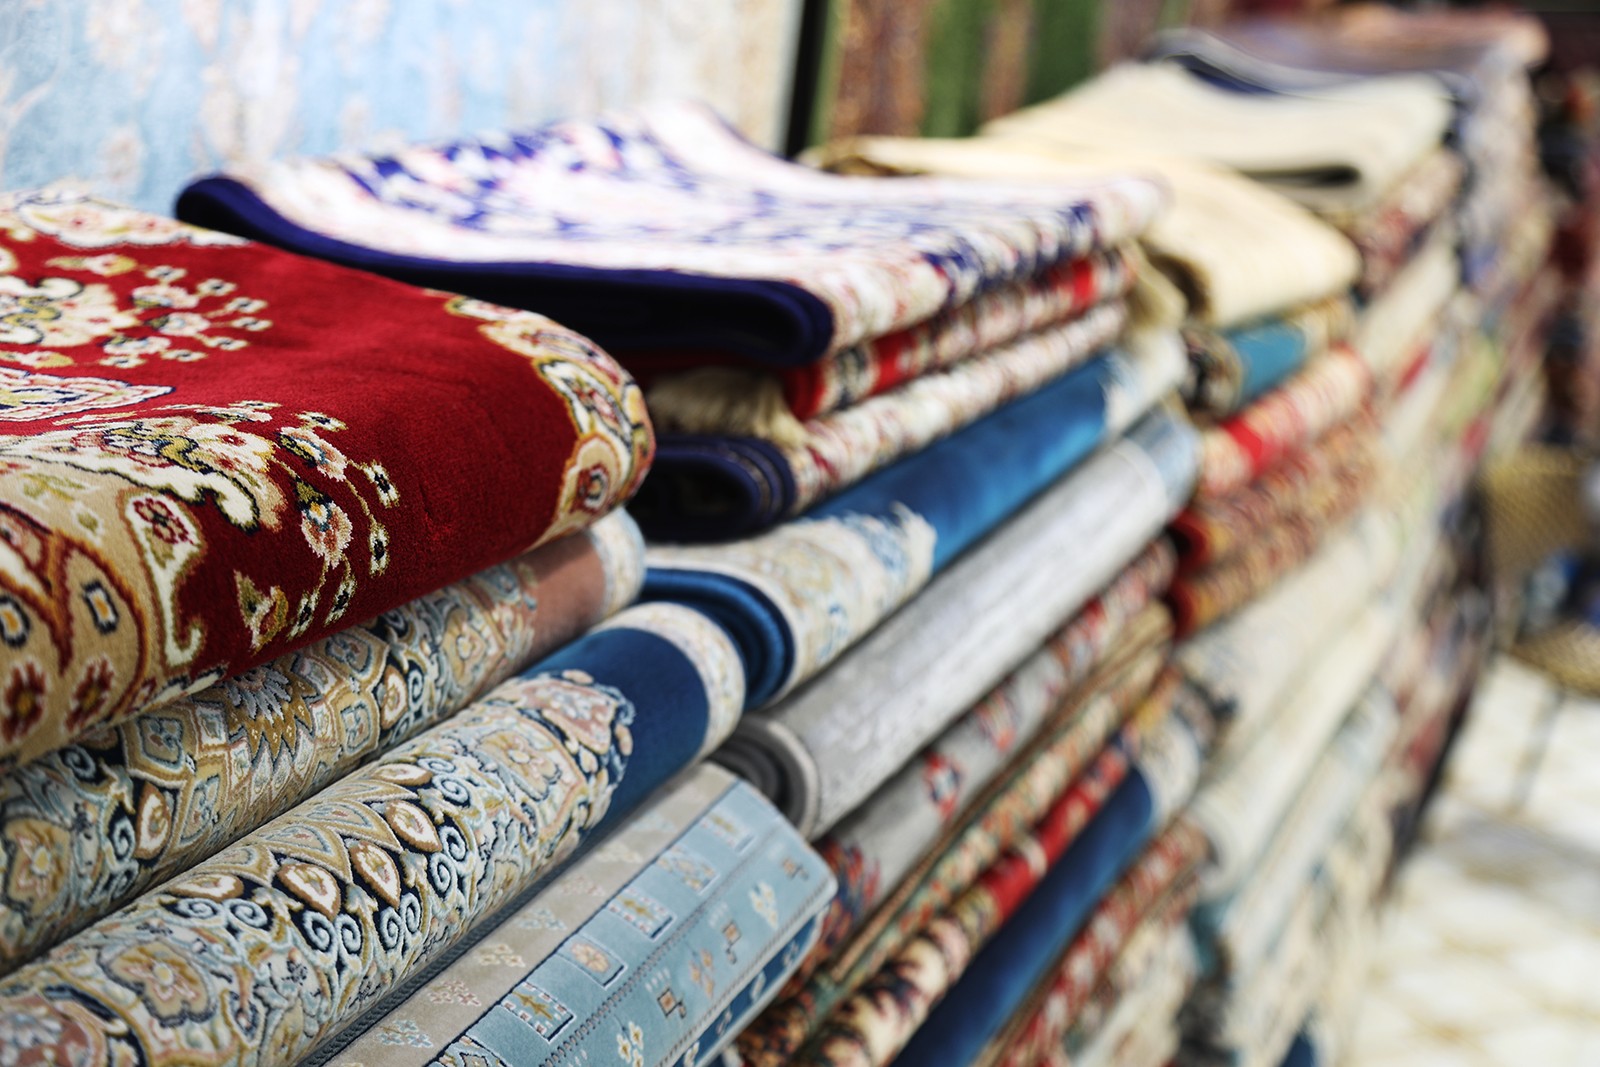 Stacks of carpets are displayed for sale at the Xinjiang International Grand Bazaar in Urumqi. /CGTN